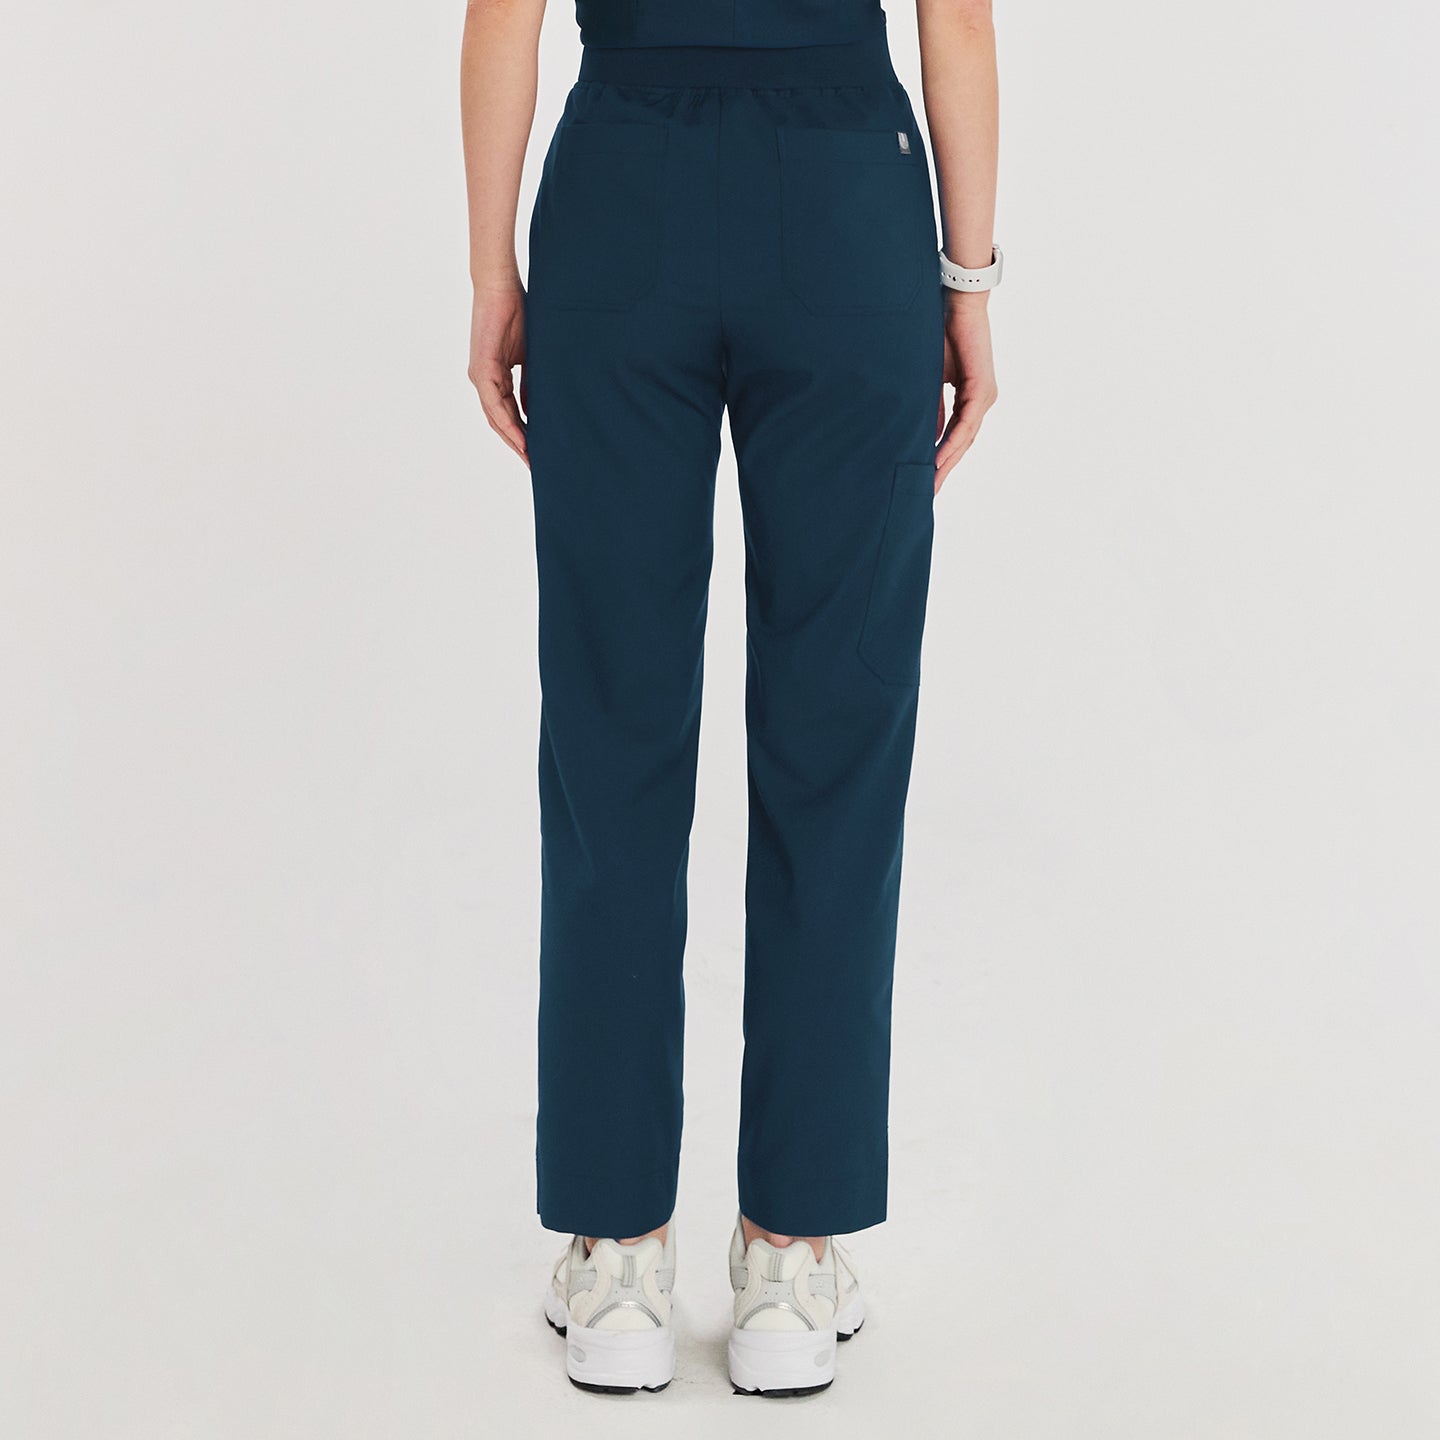 Woman wearing dark blue zipper slit scrub pants, shown from the back. The pants feature back pockets and a comfortable elastic waistband,Dark Blue